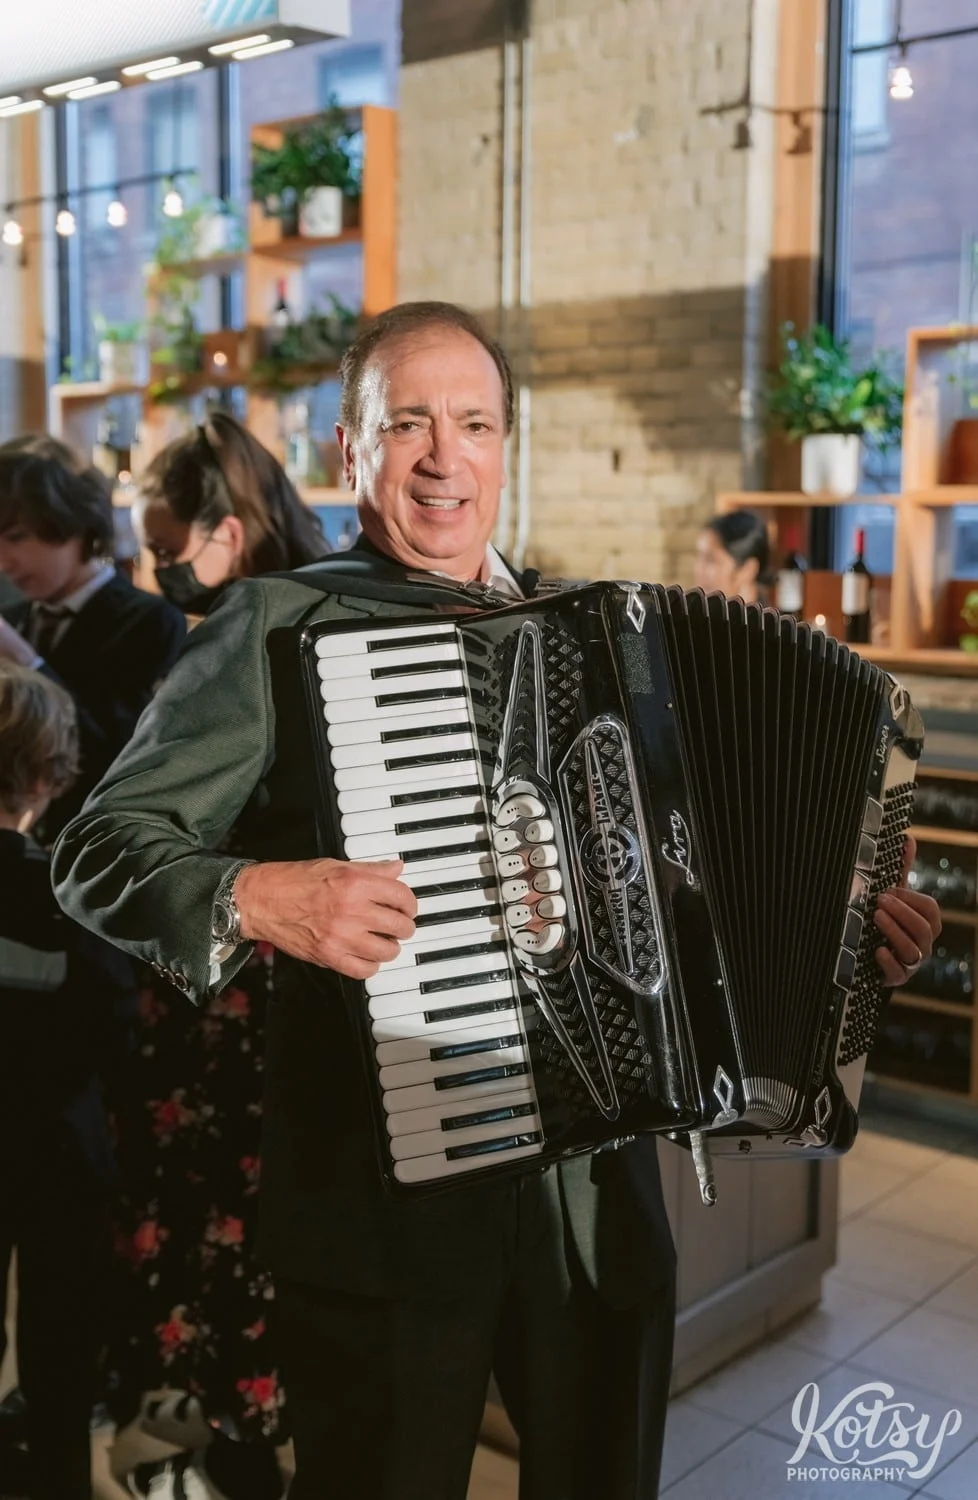 And accordion player poses for a photo while holding his accordion during a wedding reception at second floor events in Toronto Canada